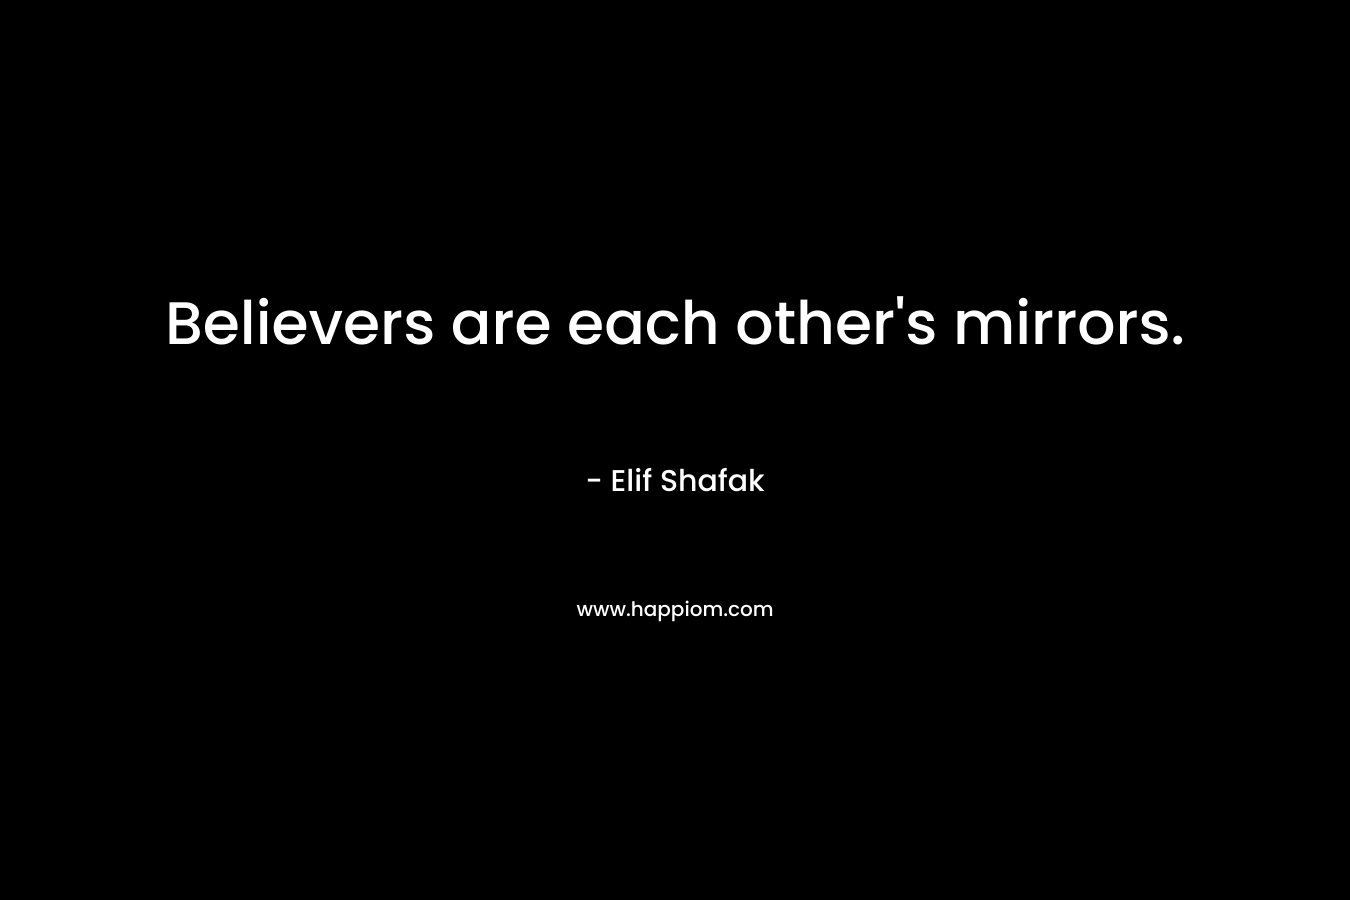 Believers are each other’s mirrors. – Elif Shafak